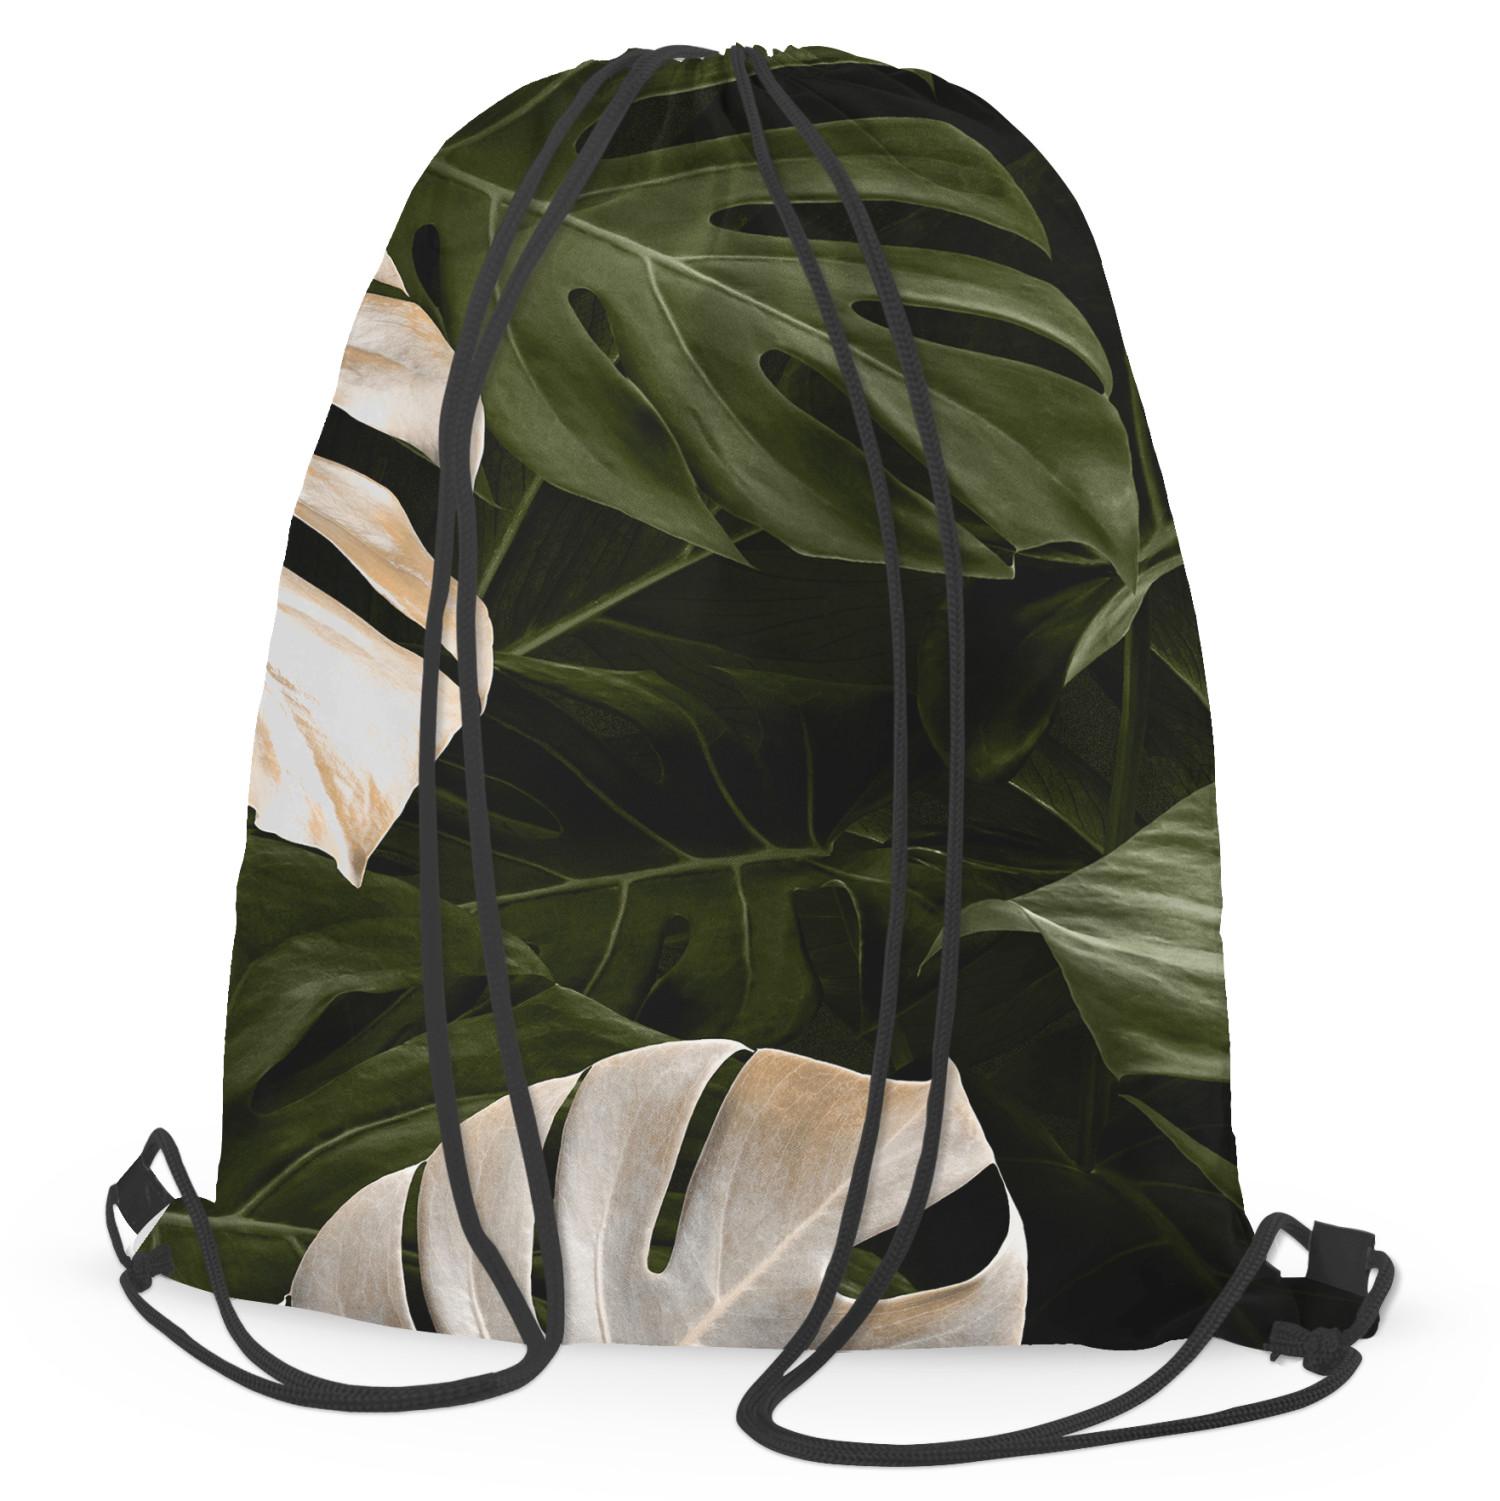 Backpack Faces of the monstera - composition with rich detail of egoztic plants